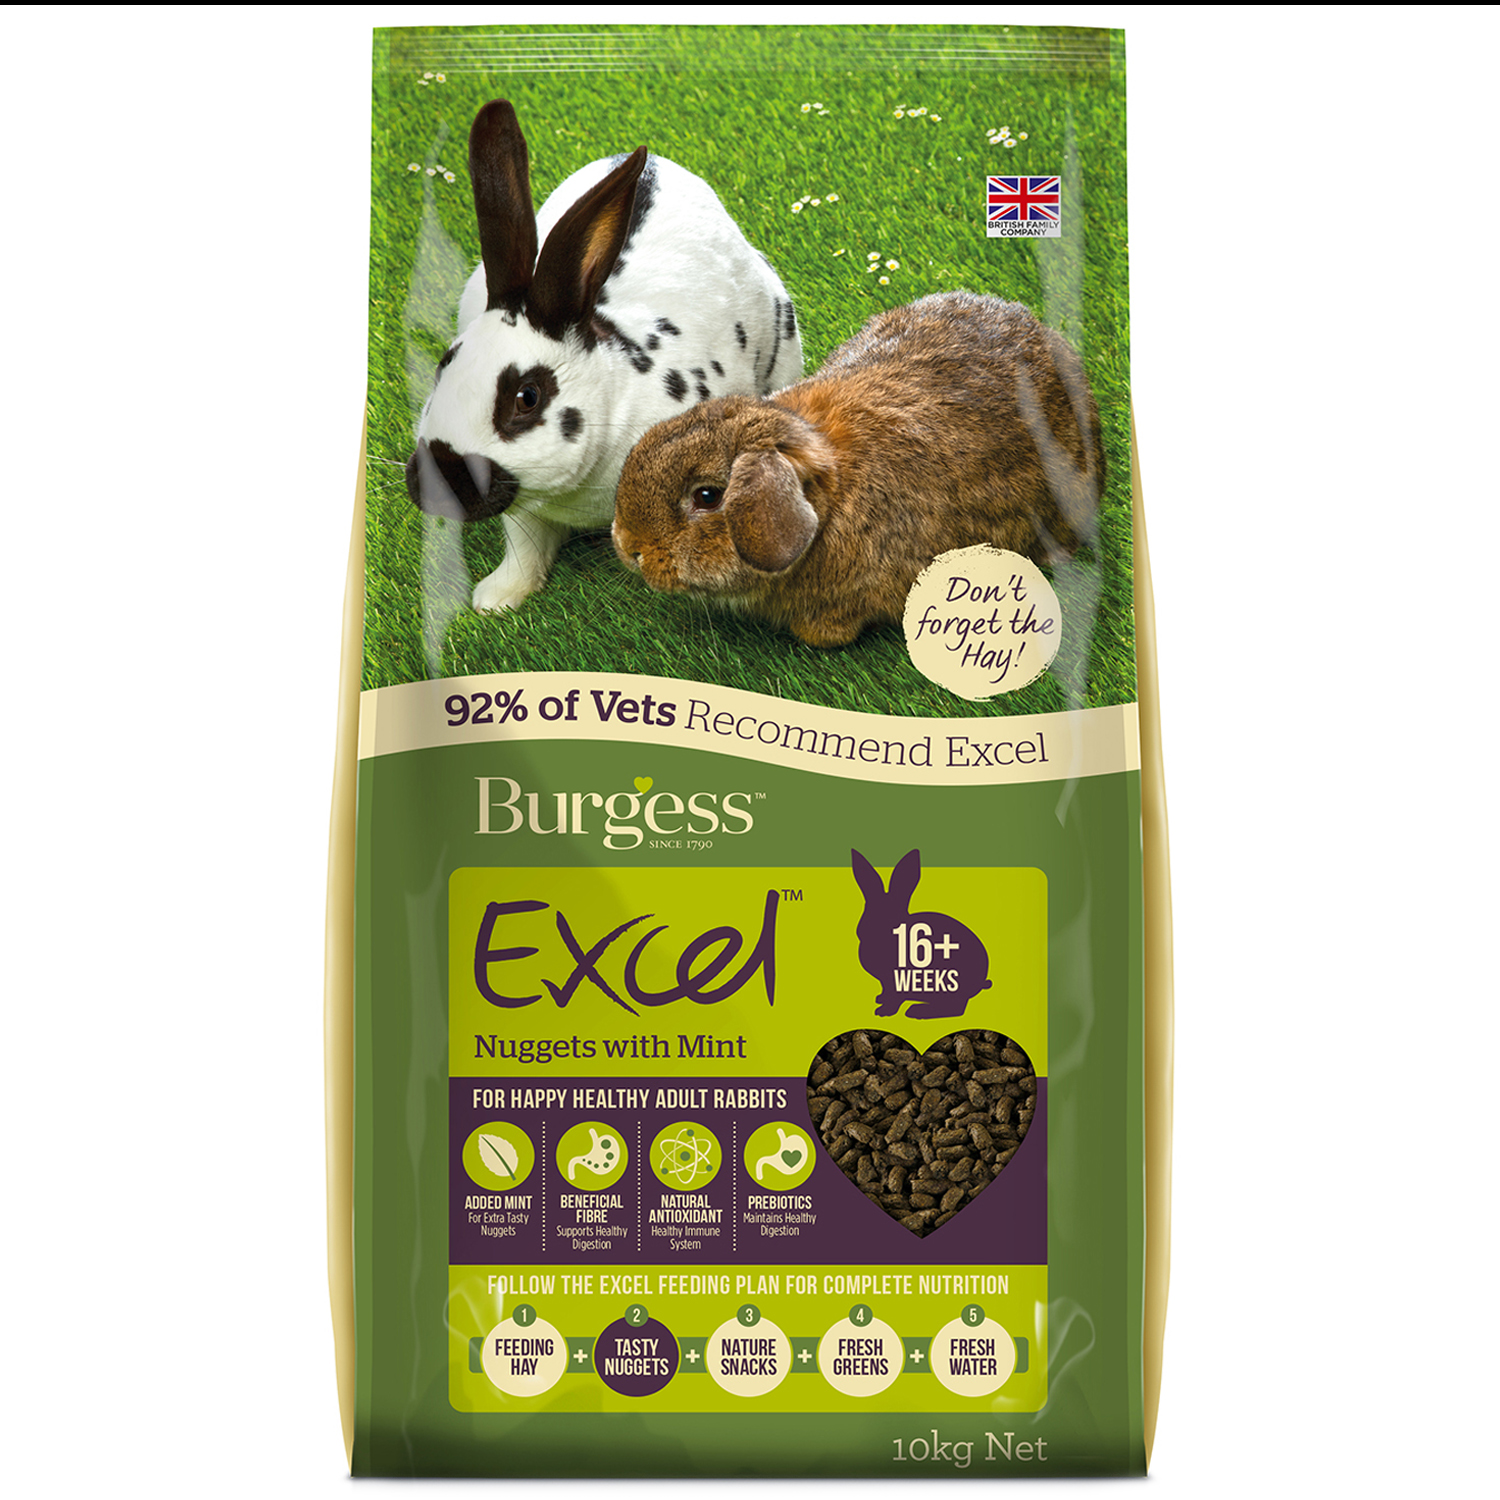 Burgess Excel Nuggets with Mint Adult Rabbit Food 10kg Image